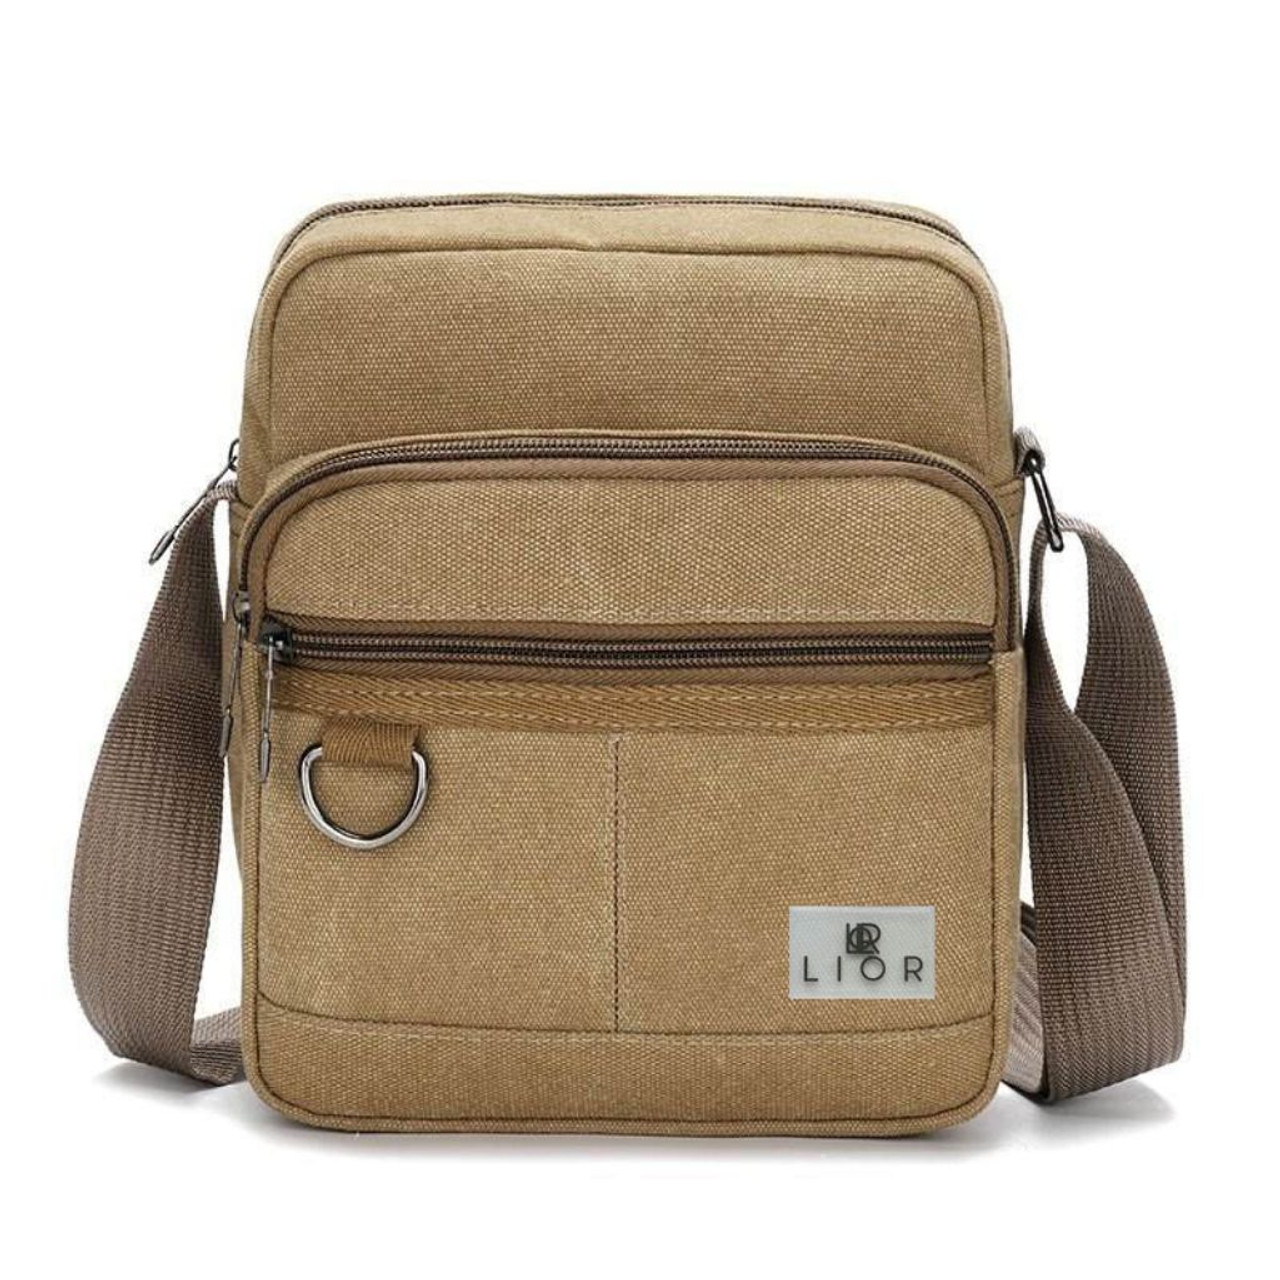 Lior™ High-Quality Casual Shoulder Bag product image